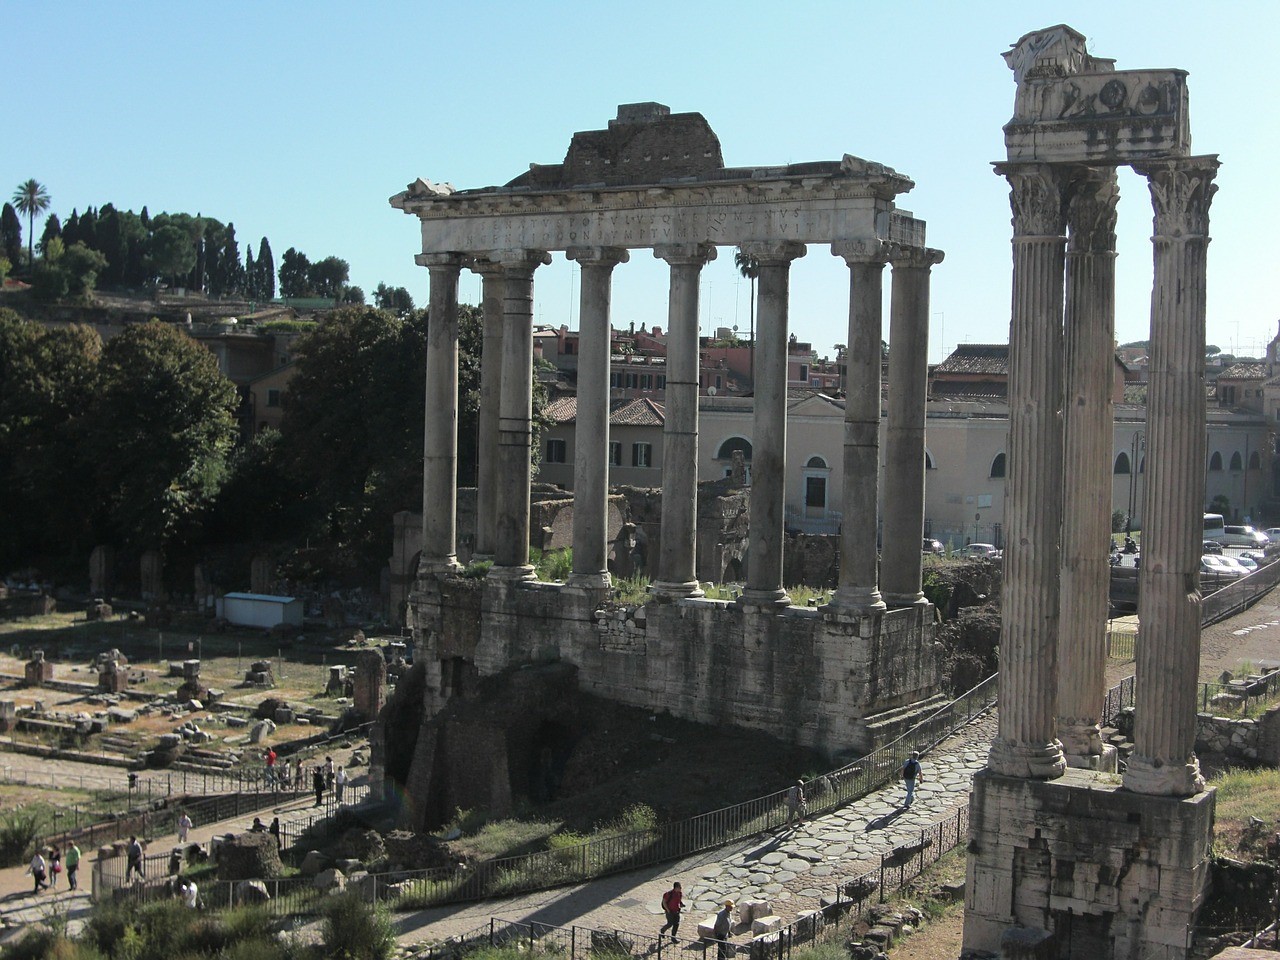 Taking a walk through history in the Roman Forum